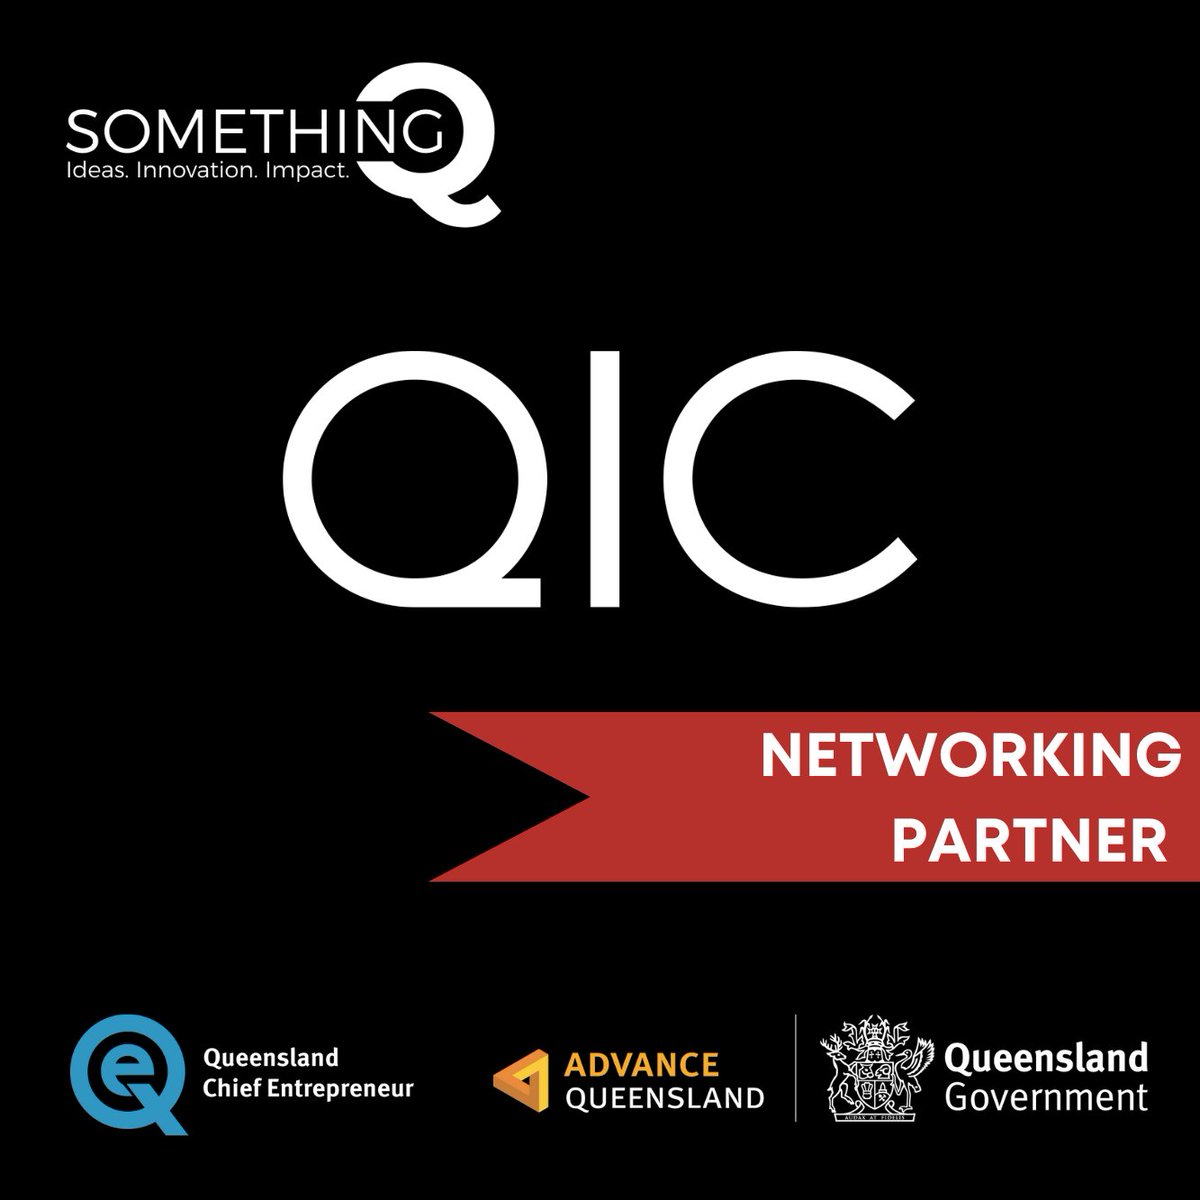 The Queensland Chief Entrepreneur announces QIC as Networking Partner for SomethingQ! Learn more: qic.com.au. Tickets on sale now: bit.ly/somethingqtick…. #SQ23 #SomethingQ #innovation